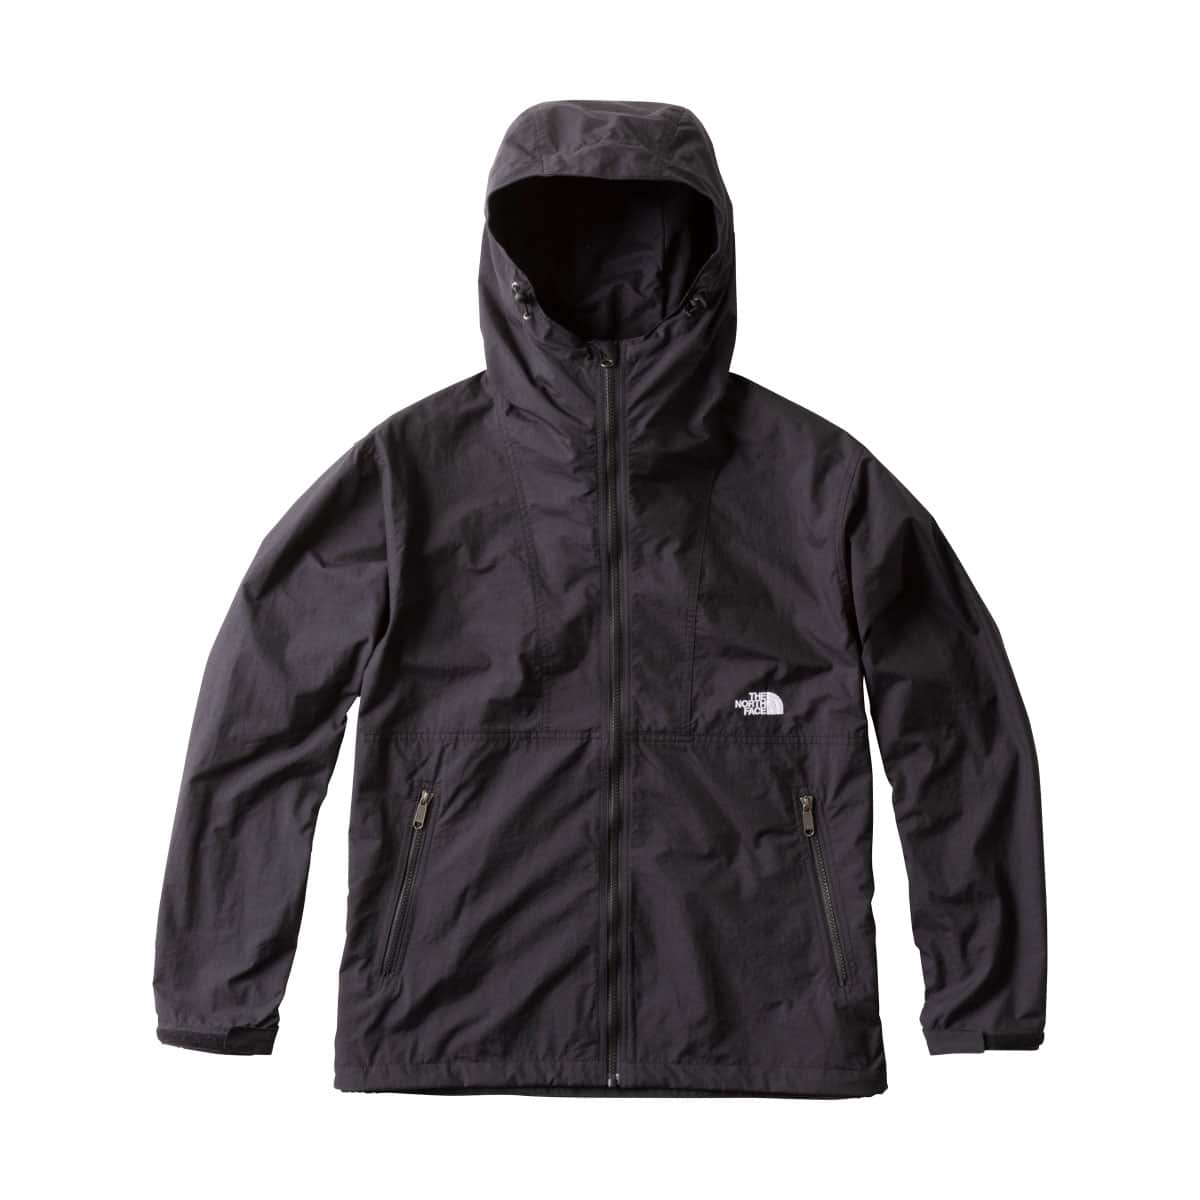 THE NORTH FACE COMPACT JACKET K/ブラック 21FW-I